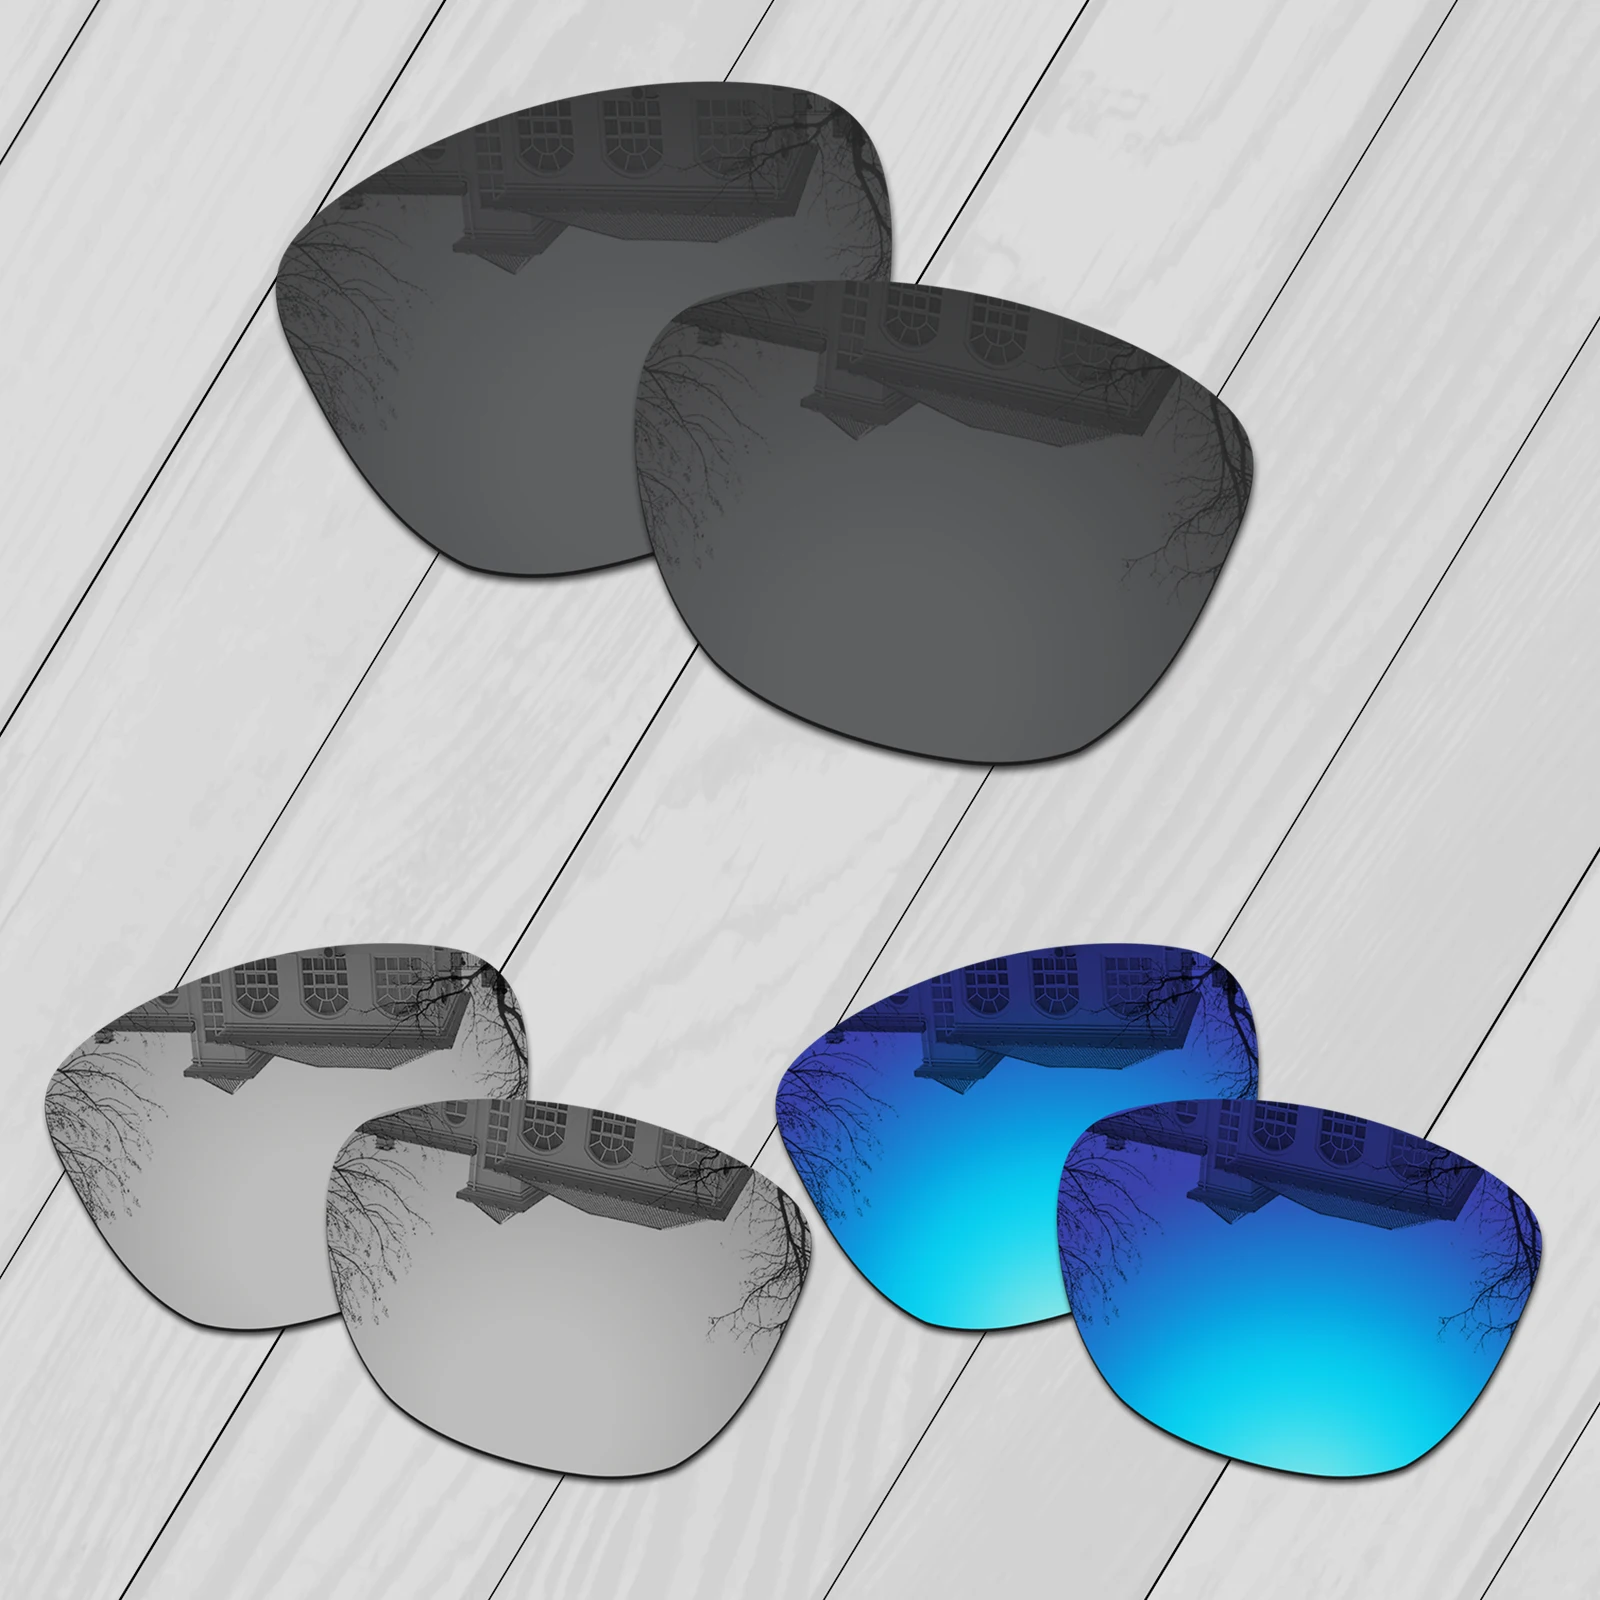 E.O.S 3 Pairs Black & Silver & Ice Blue Polarized Replacement Lenses for Oakley Jupiter Sunglasses